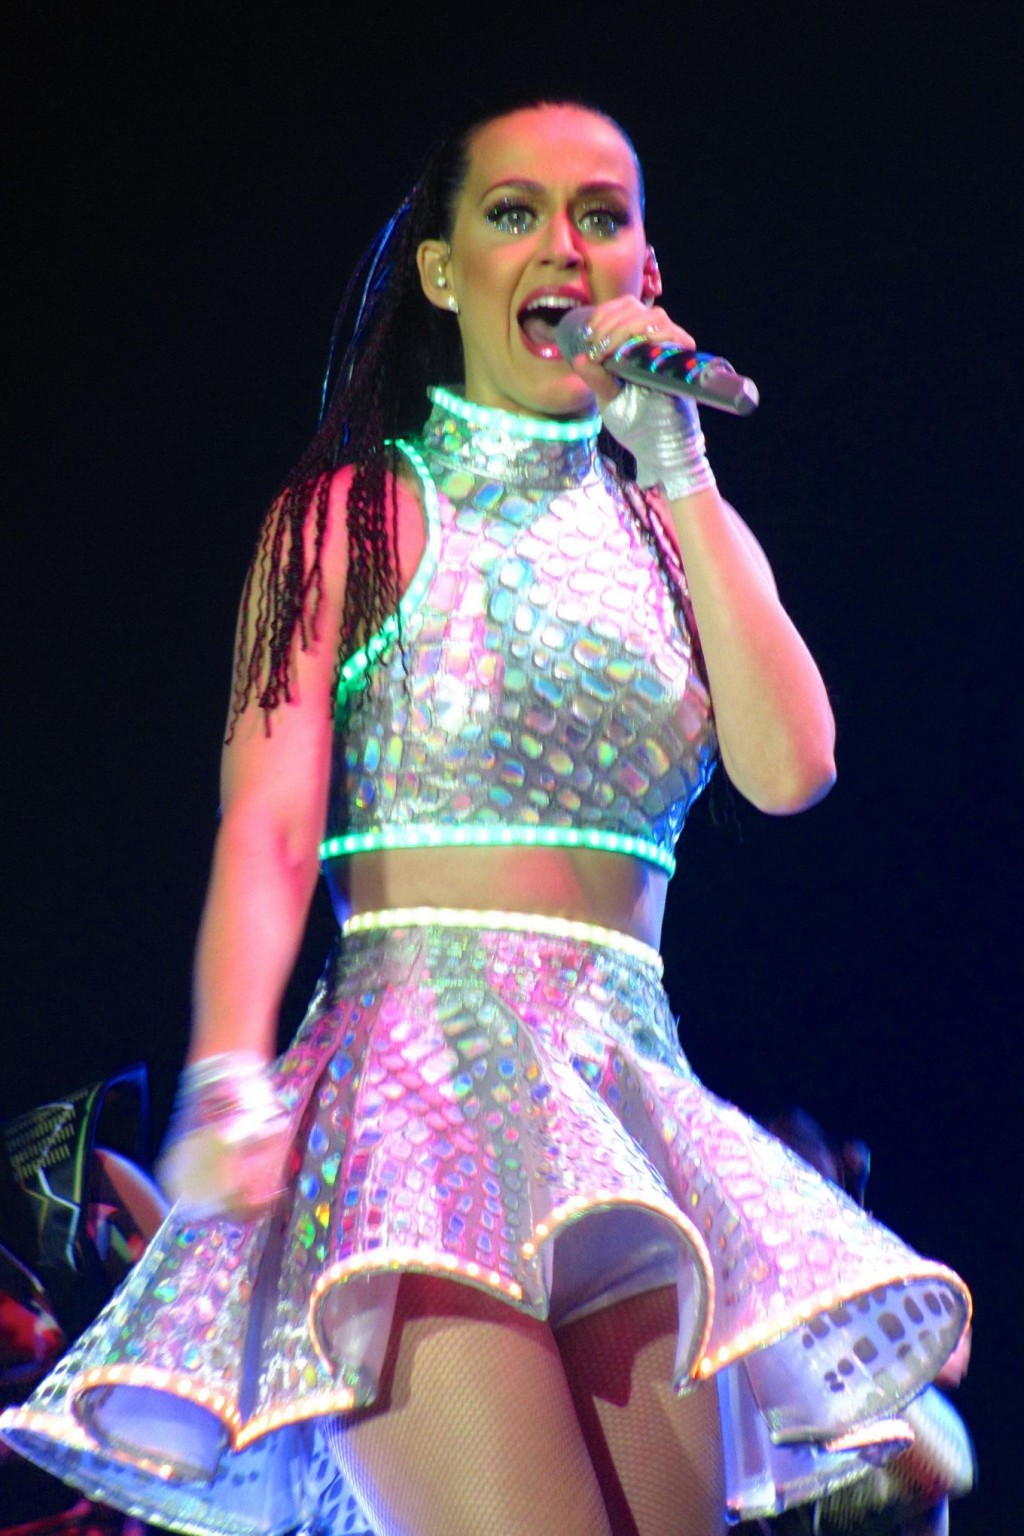 Katy Perry upskirt on stage at the Prismatic tour in Belfast #75197103